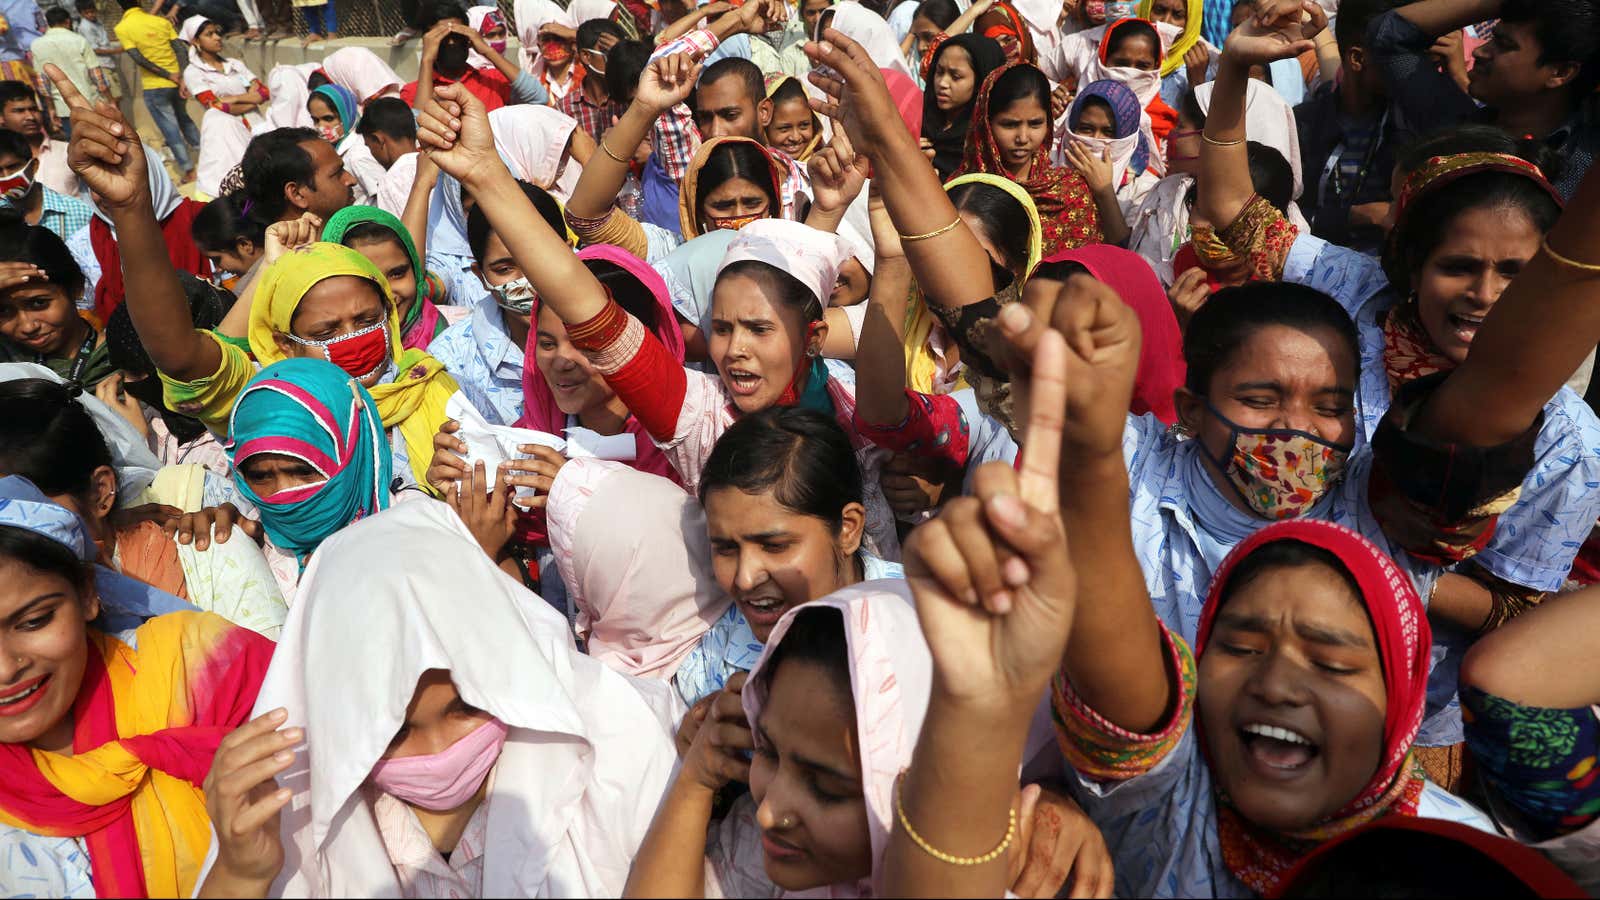 Garment workers protesting for higher wages in Dhaka.